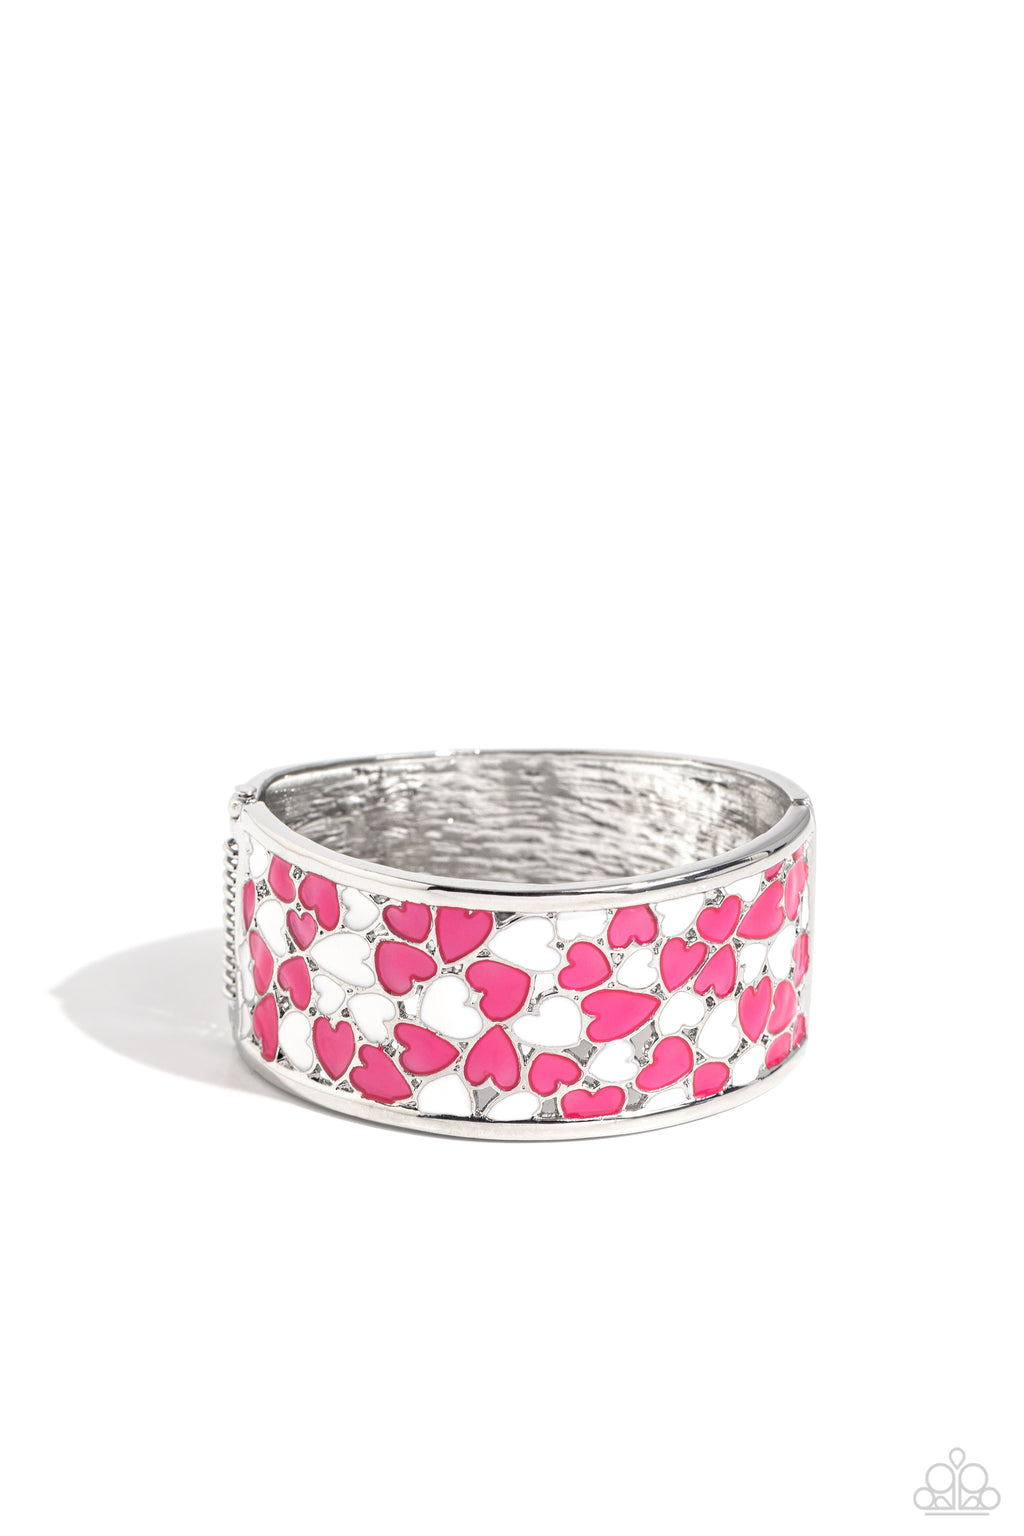 five-dollar-jewelry-penchant-for-patterns-pink-bracelet-paparazzi-accessories